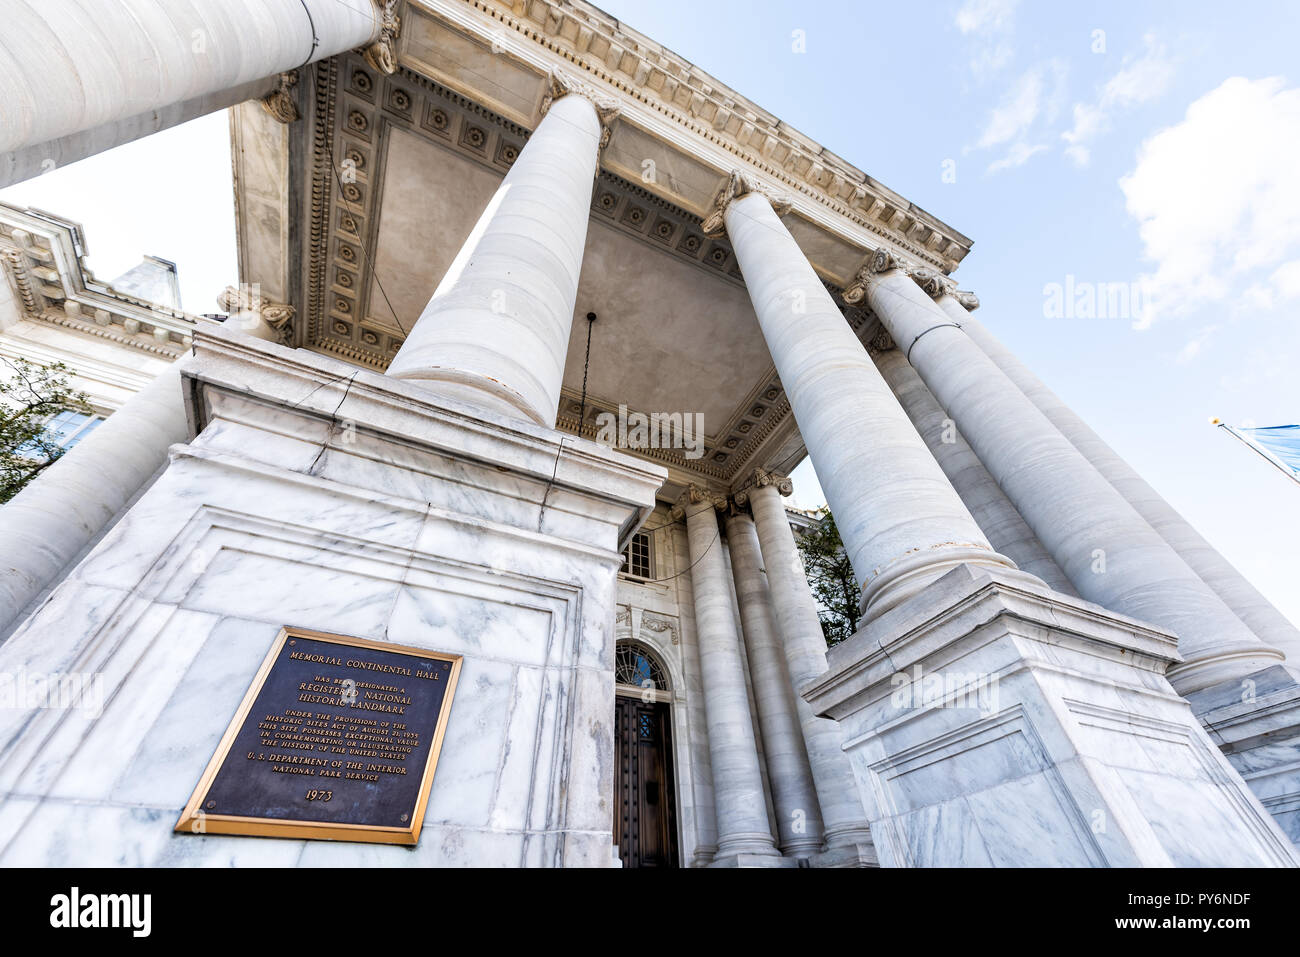 Washington DC, USA - March 9, 2018: Memorial Continental Hall sign, entrance by street and building, historic architecture, columns, looking up wide a Stock Photo